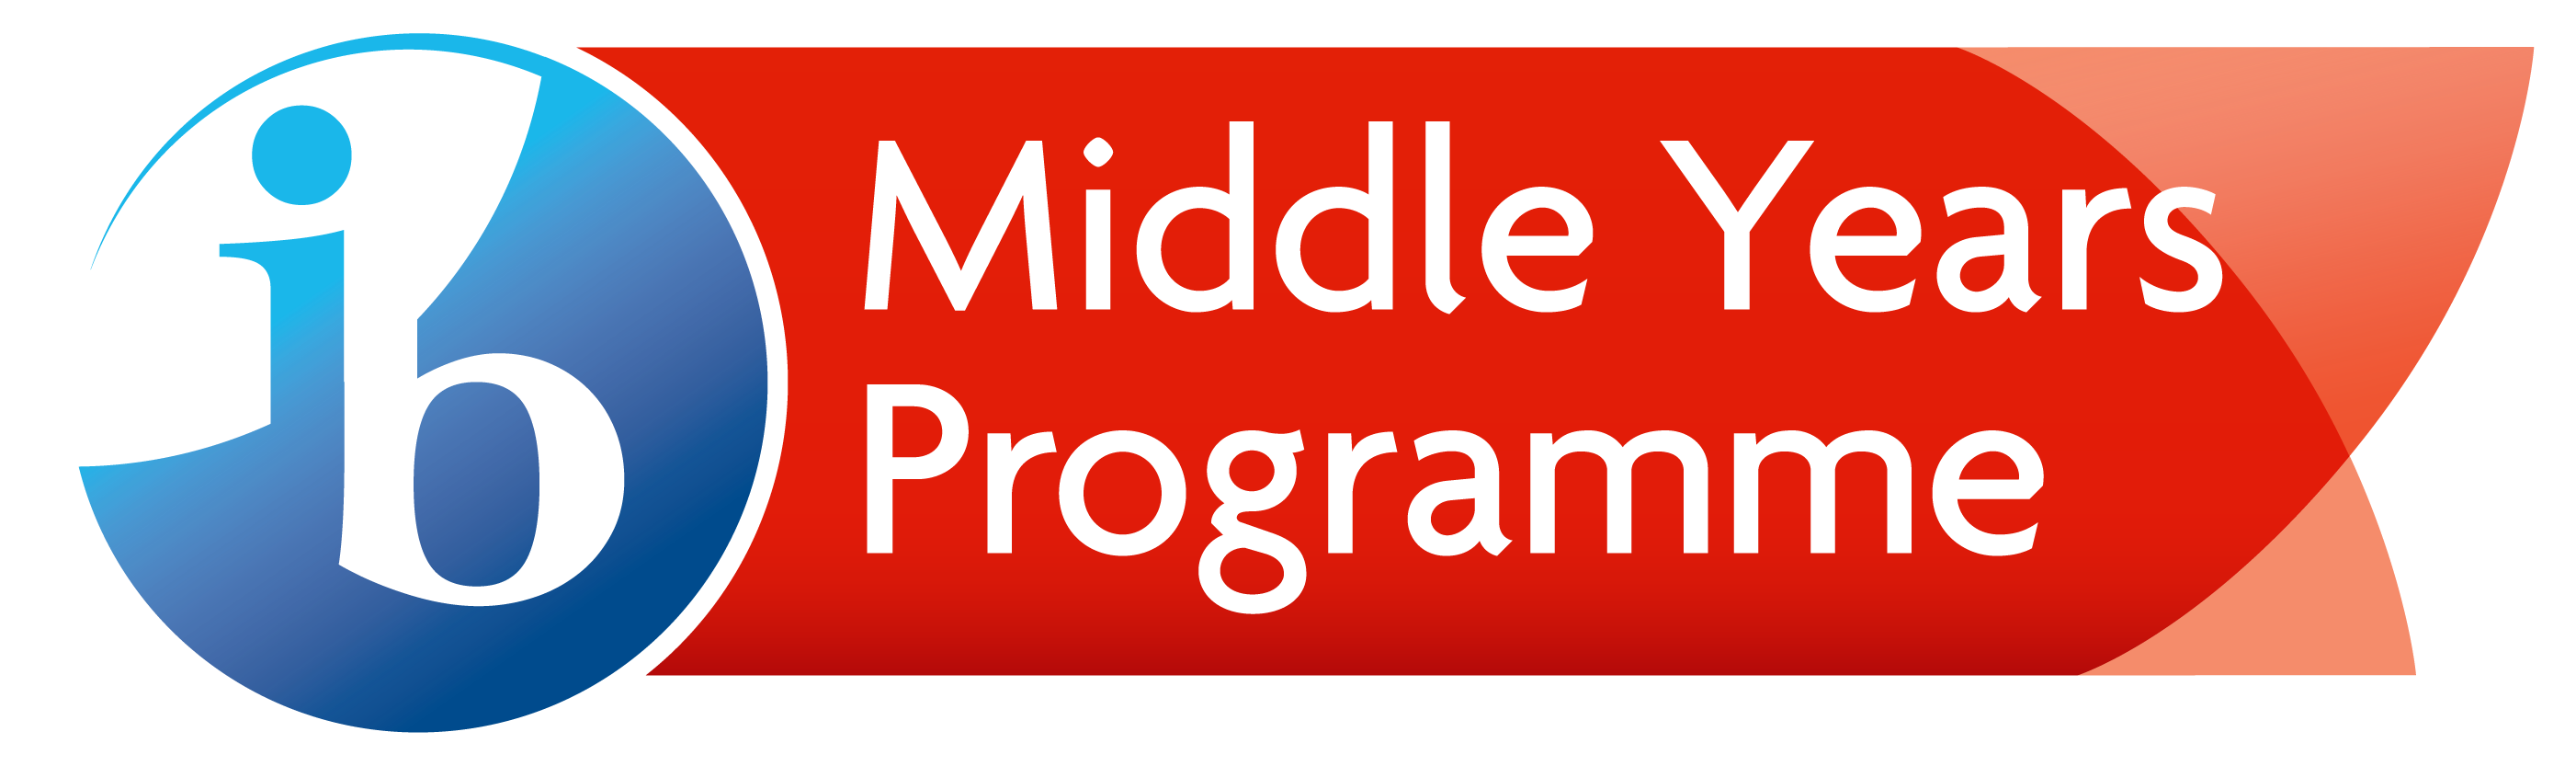 Middle Year Program written on a red rectangle